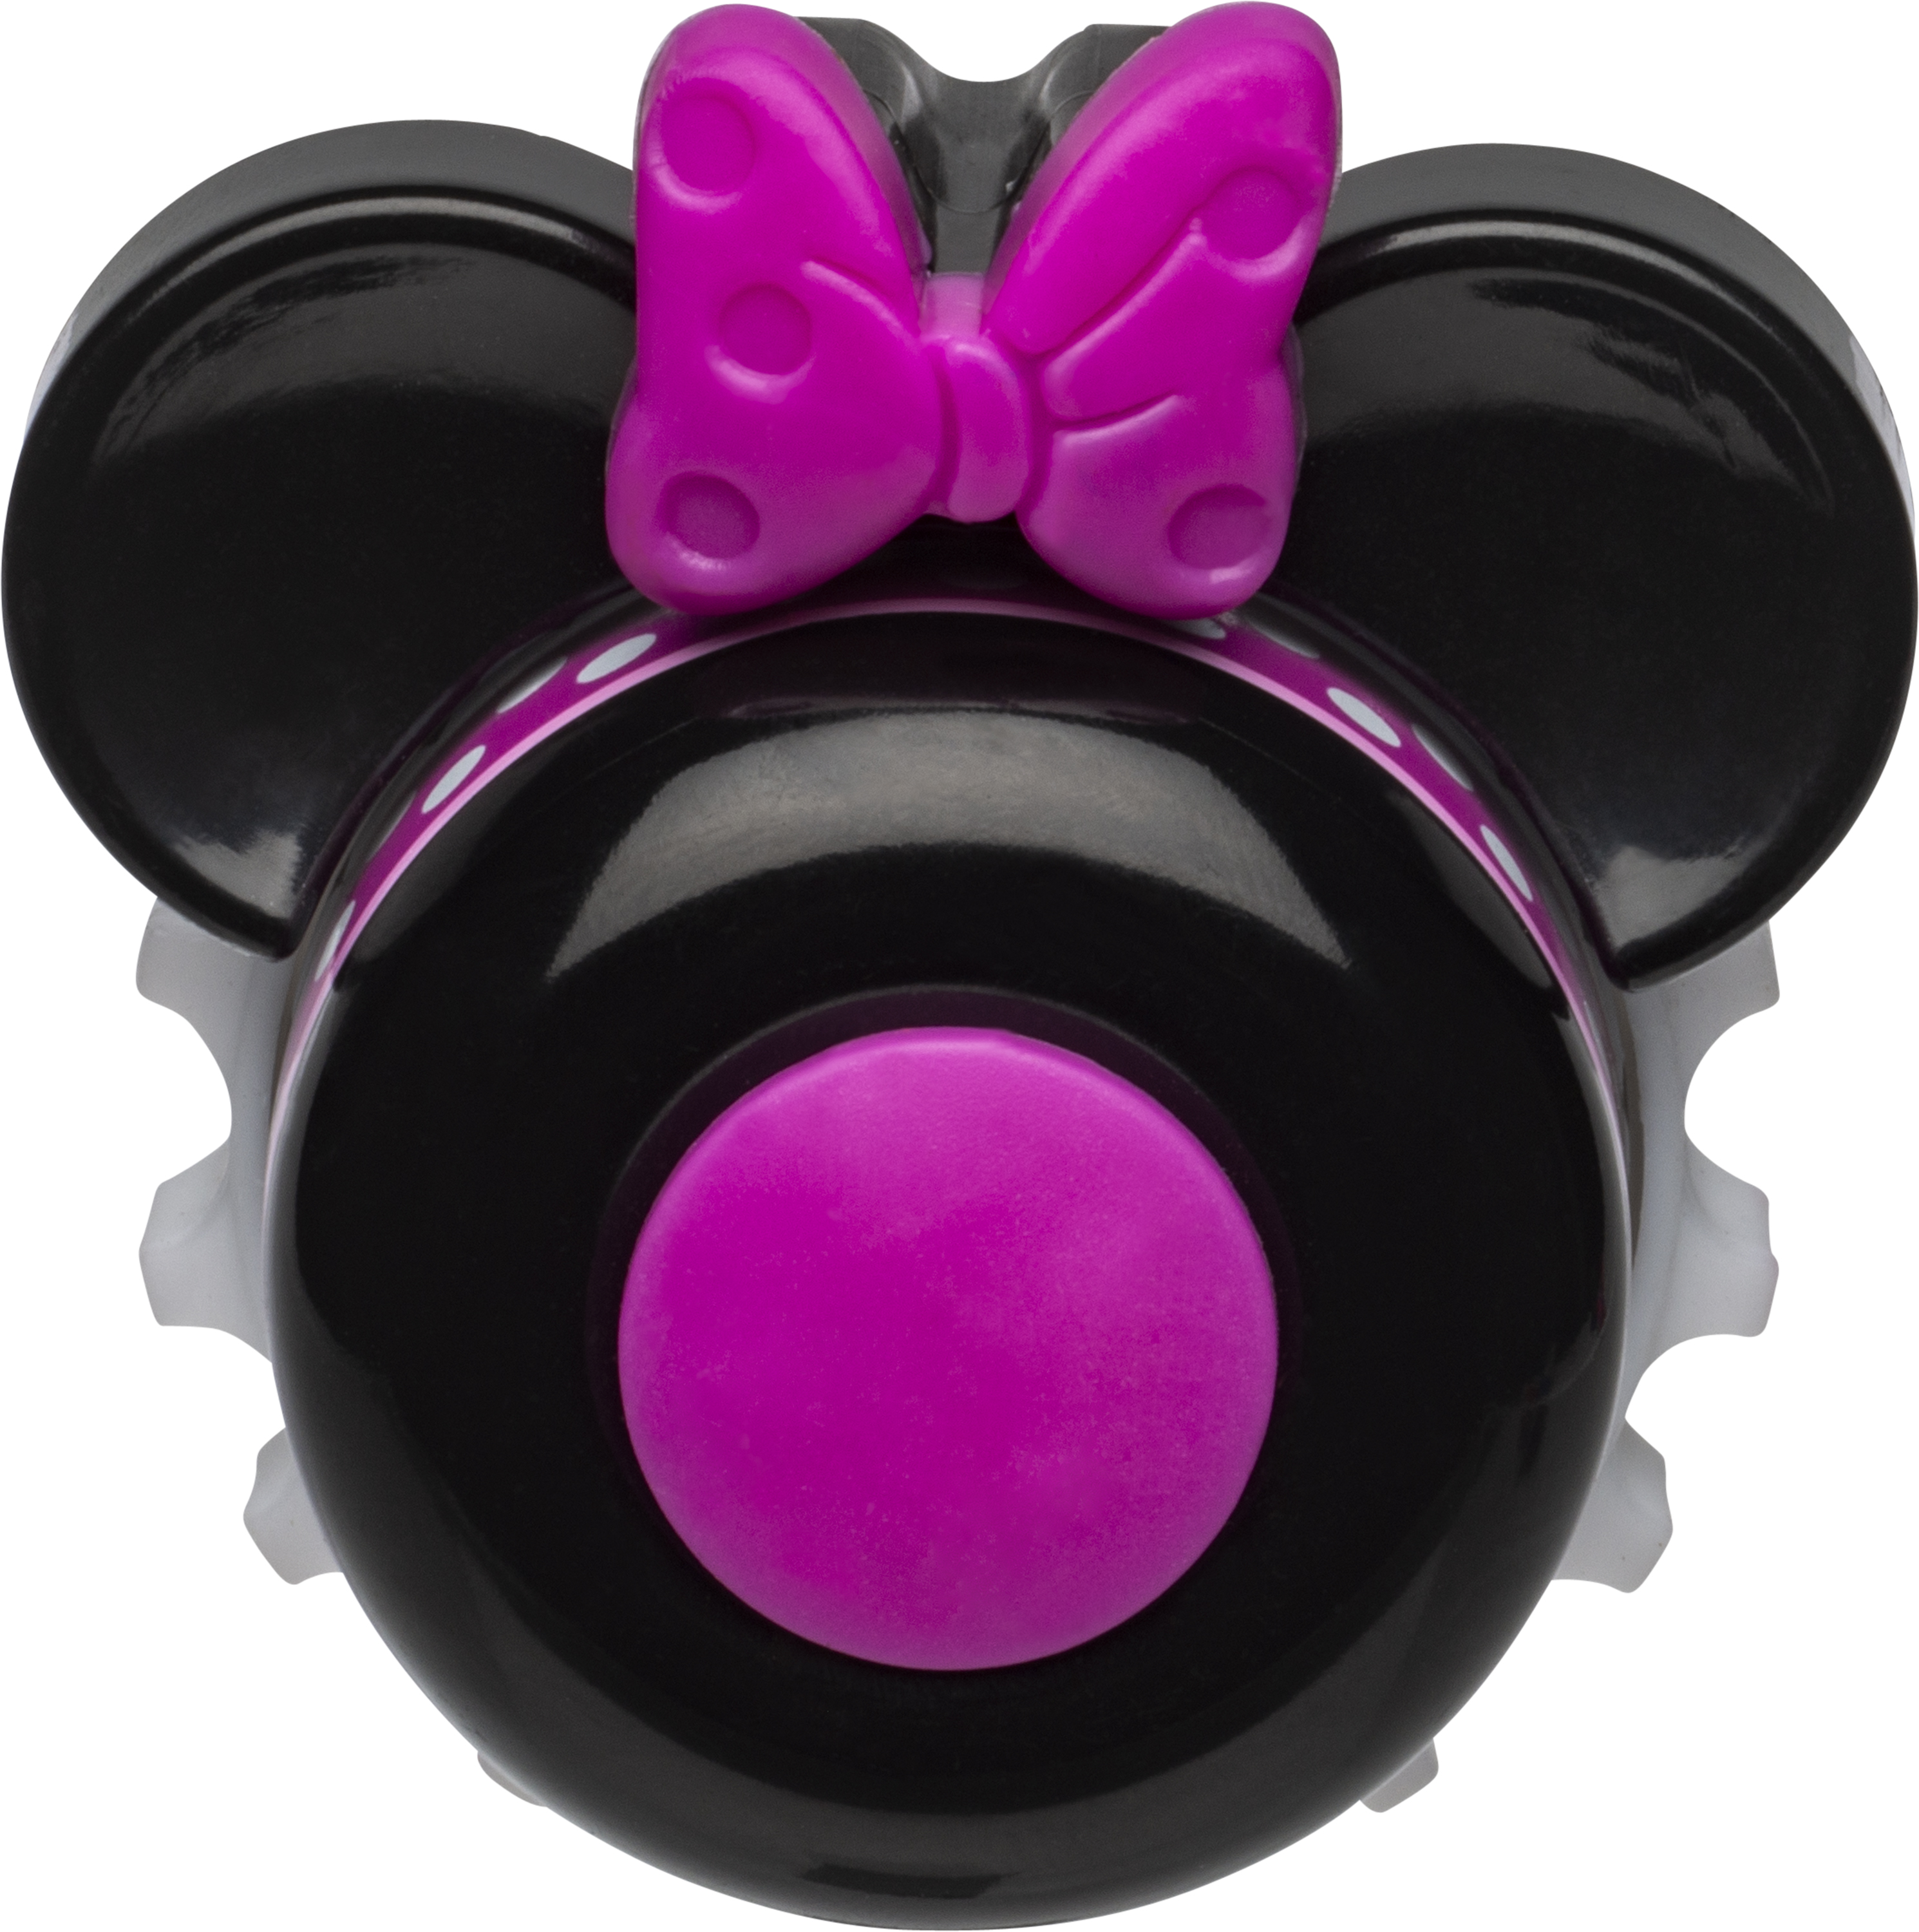 Disney Minnie Mouse Elbow & Knee Pad Set with Bike Bell Value Pack - image 3 of 5